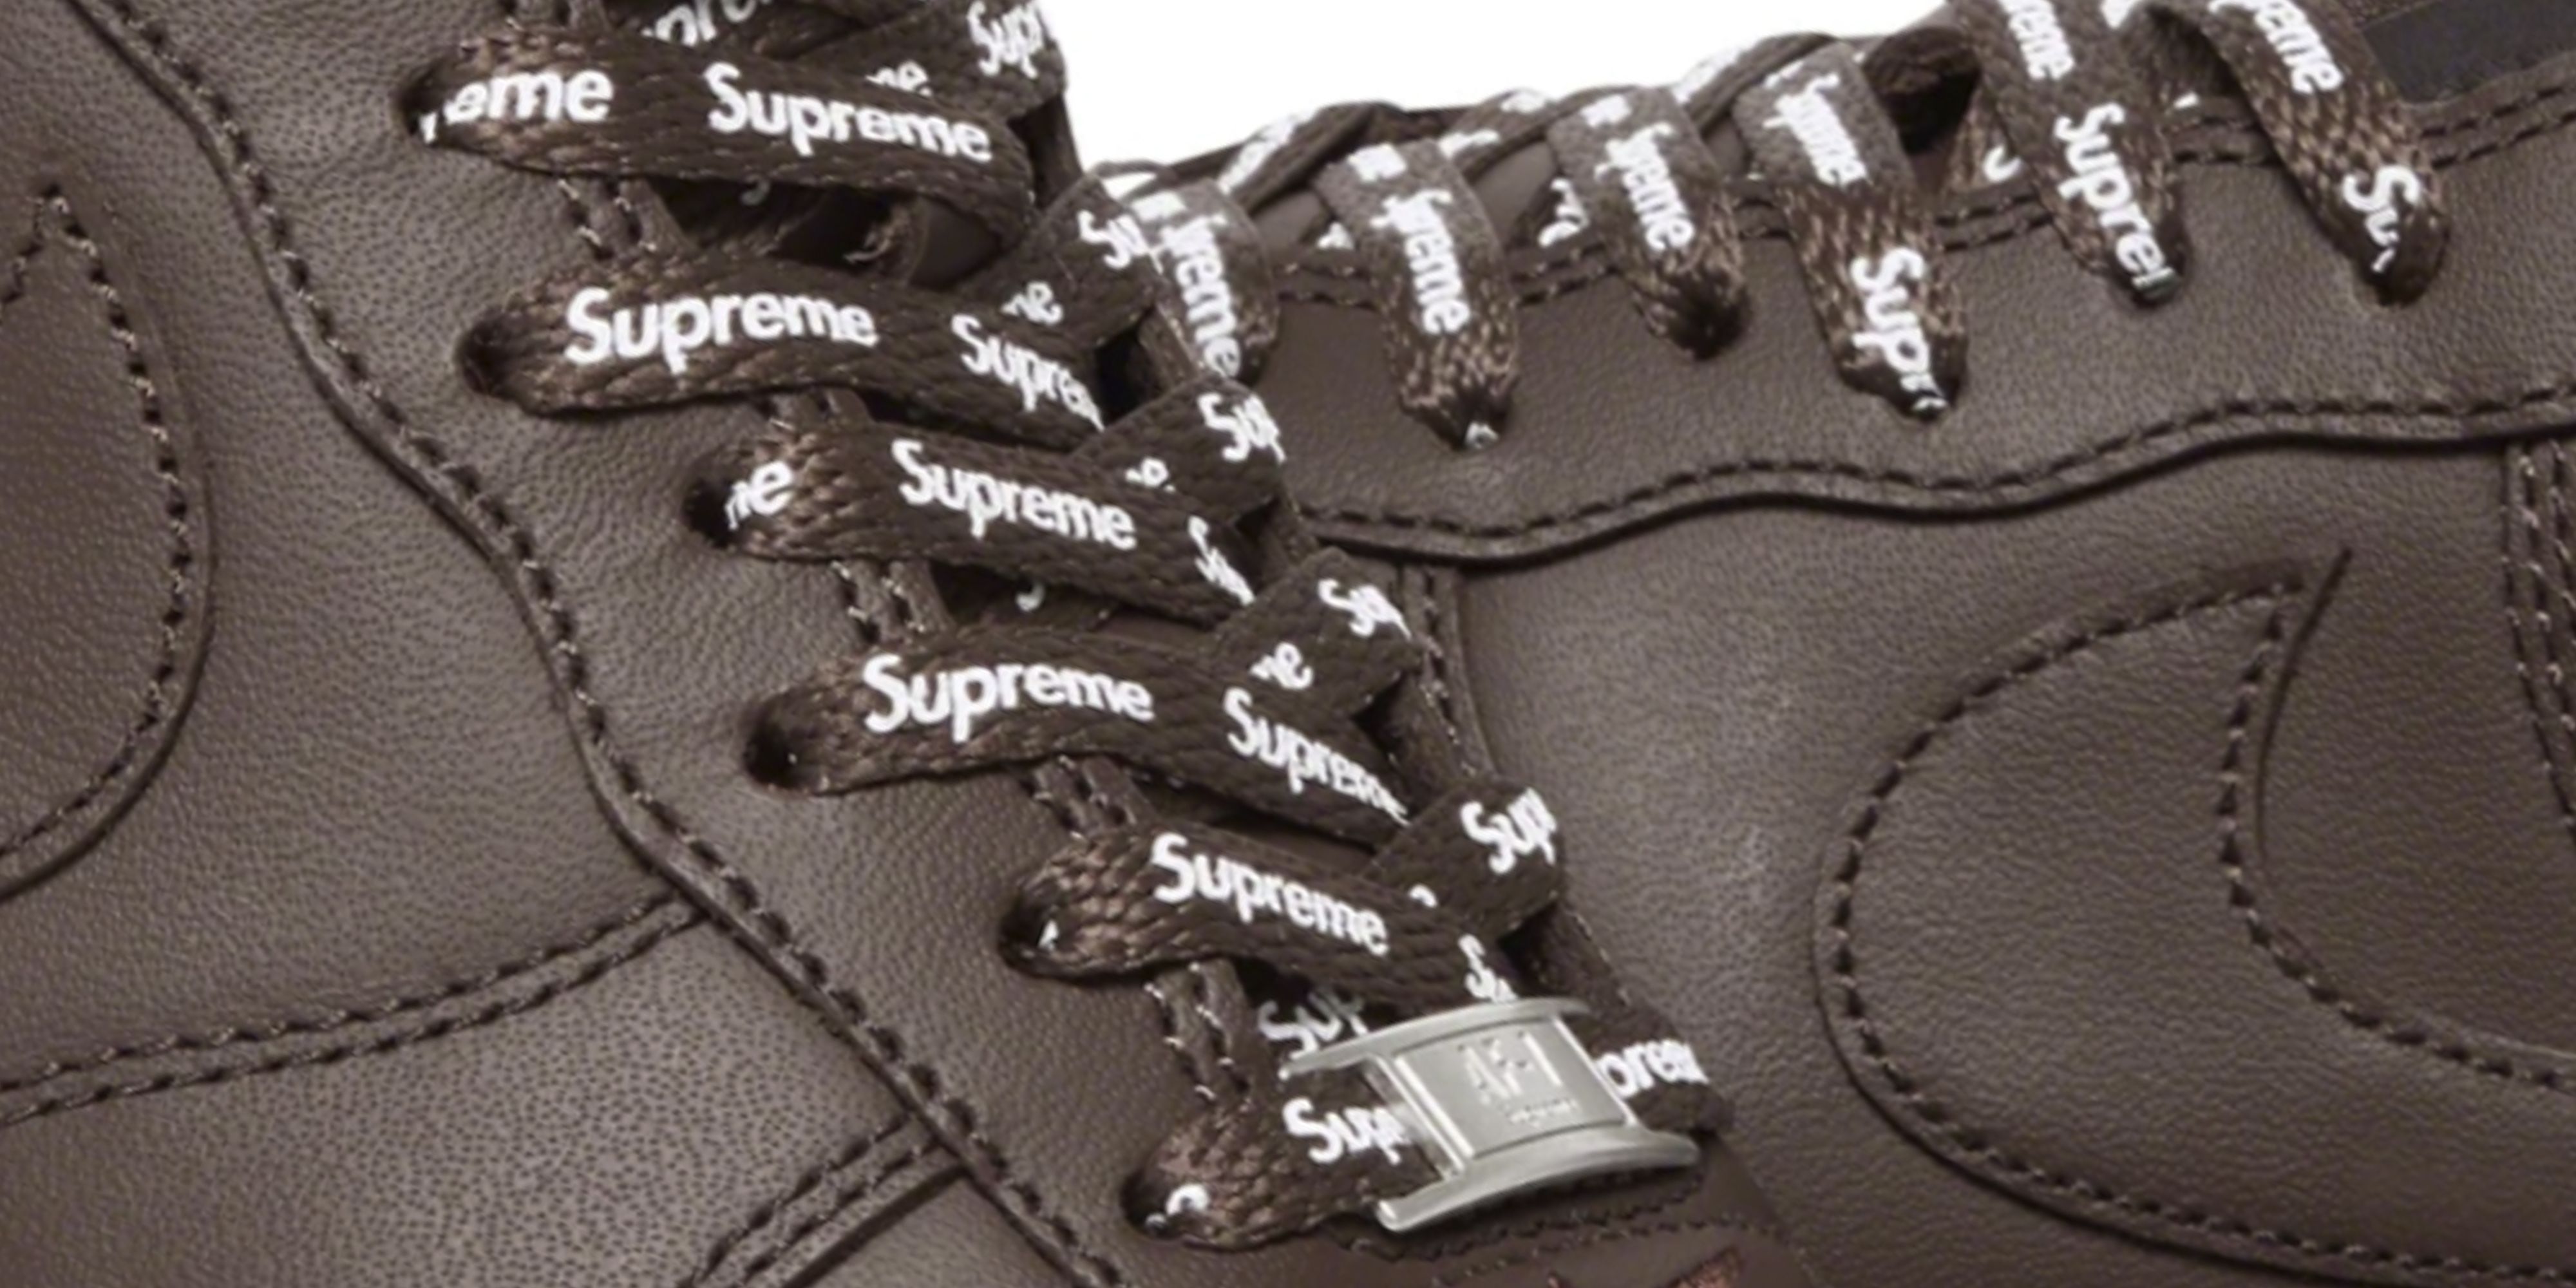 The Supreme x Nike Air Force 1 Low 'Baroque Brown' Ushers in 